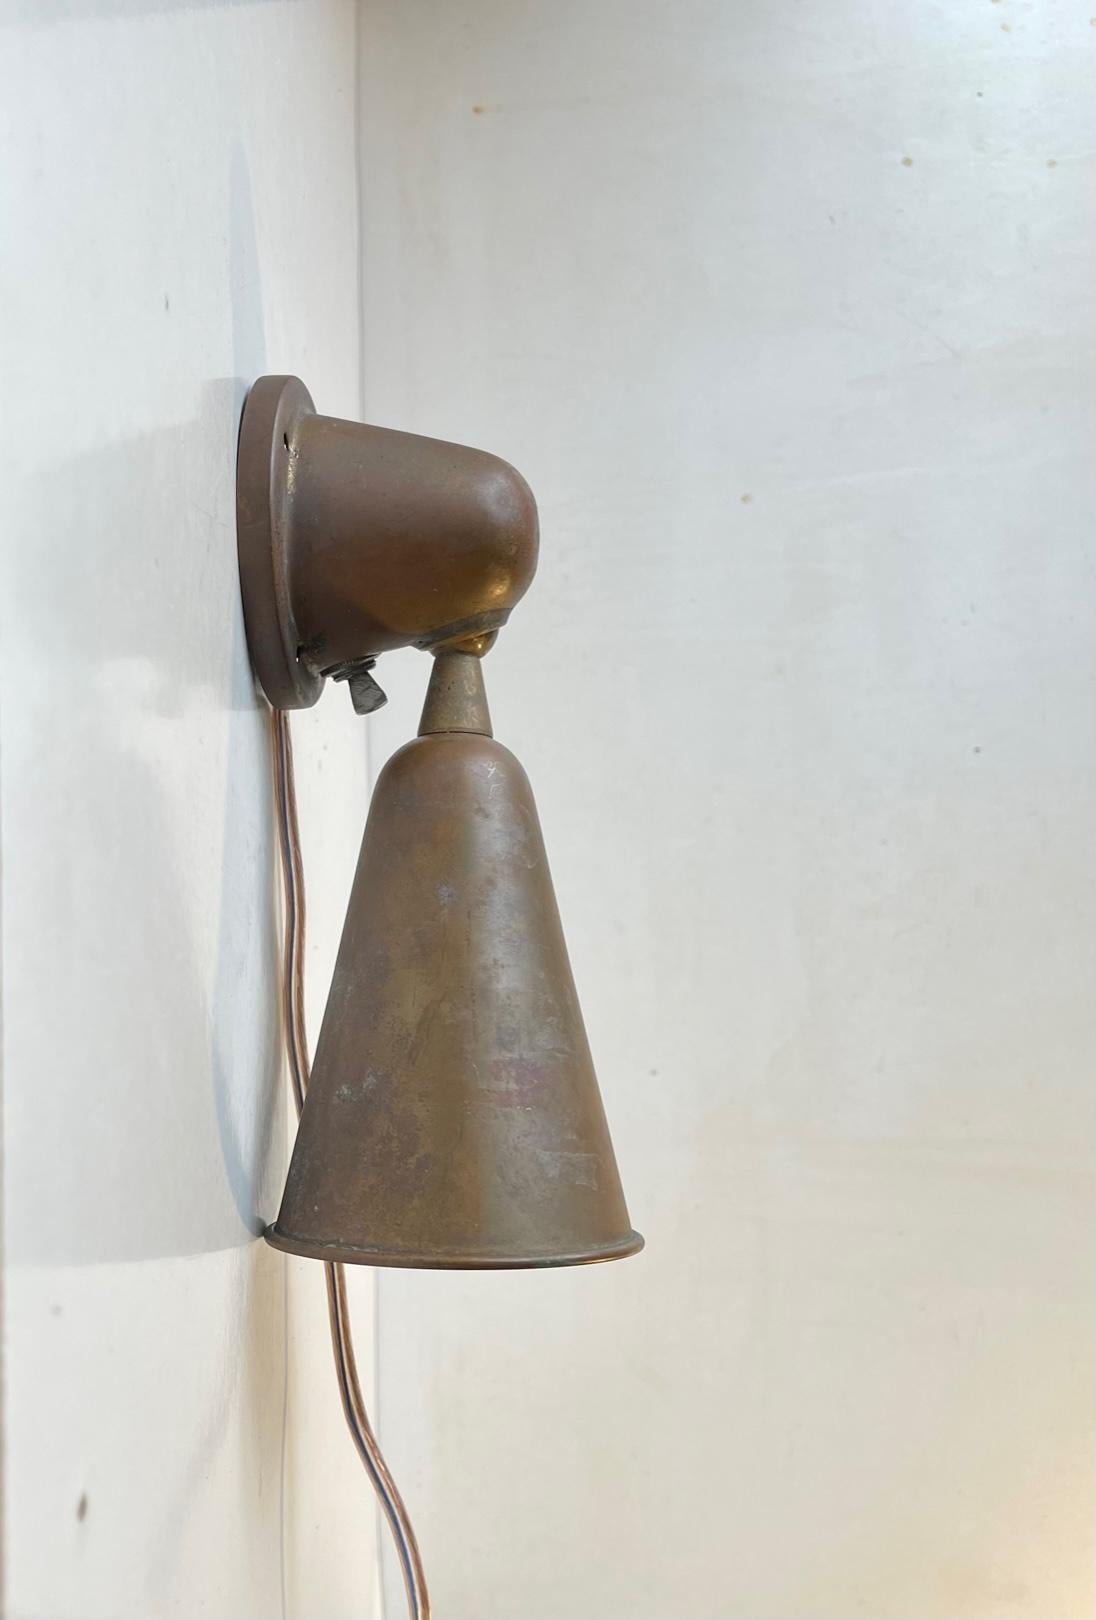 Unusual ball-bearing adjustable wall light in patinated copper. Very nautical - Maritime in appearance and according to the collector from whom we bought it was salvaged from a 1930s French or Italian Submarine. It certainly has this raw authentic